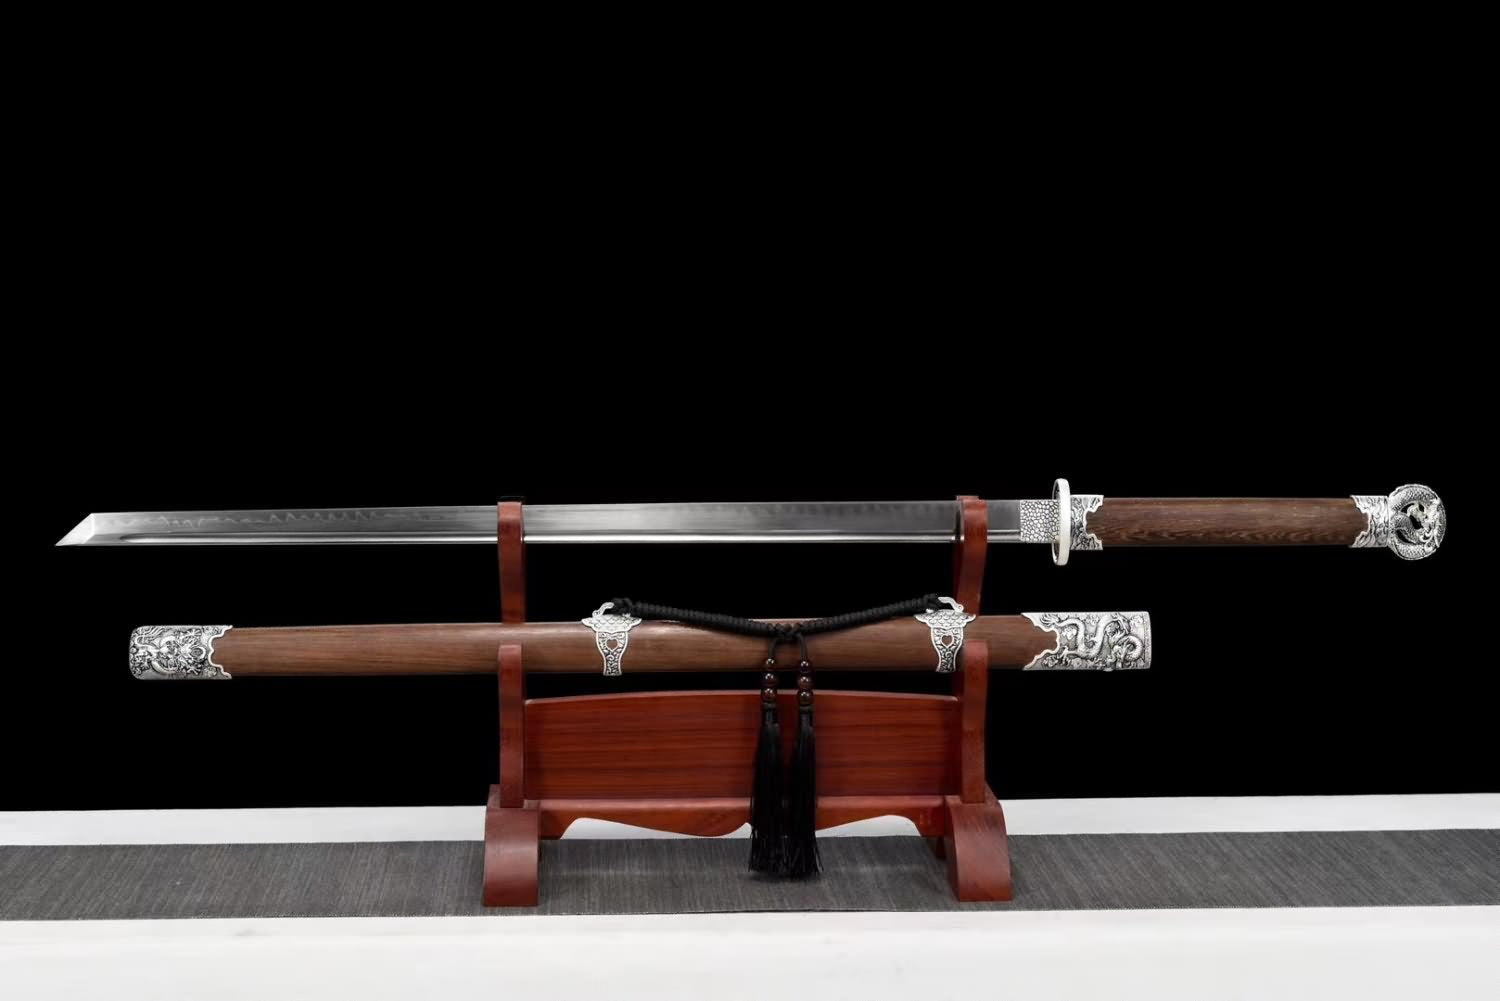 Handcrafted Chinese Huan Shou Tang Dao Sword - High Carbon Steel Clay-Tempered Blade